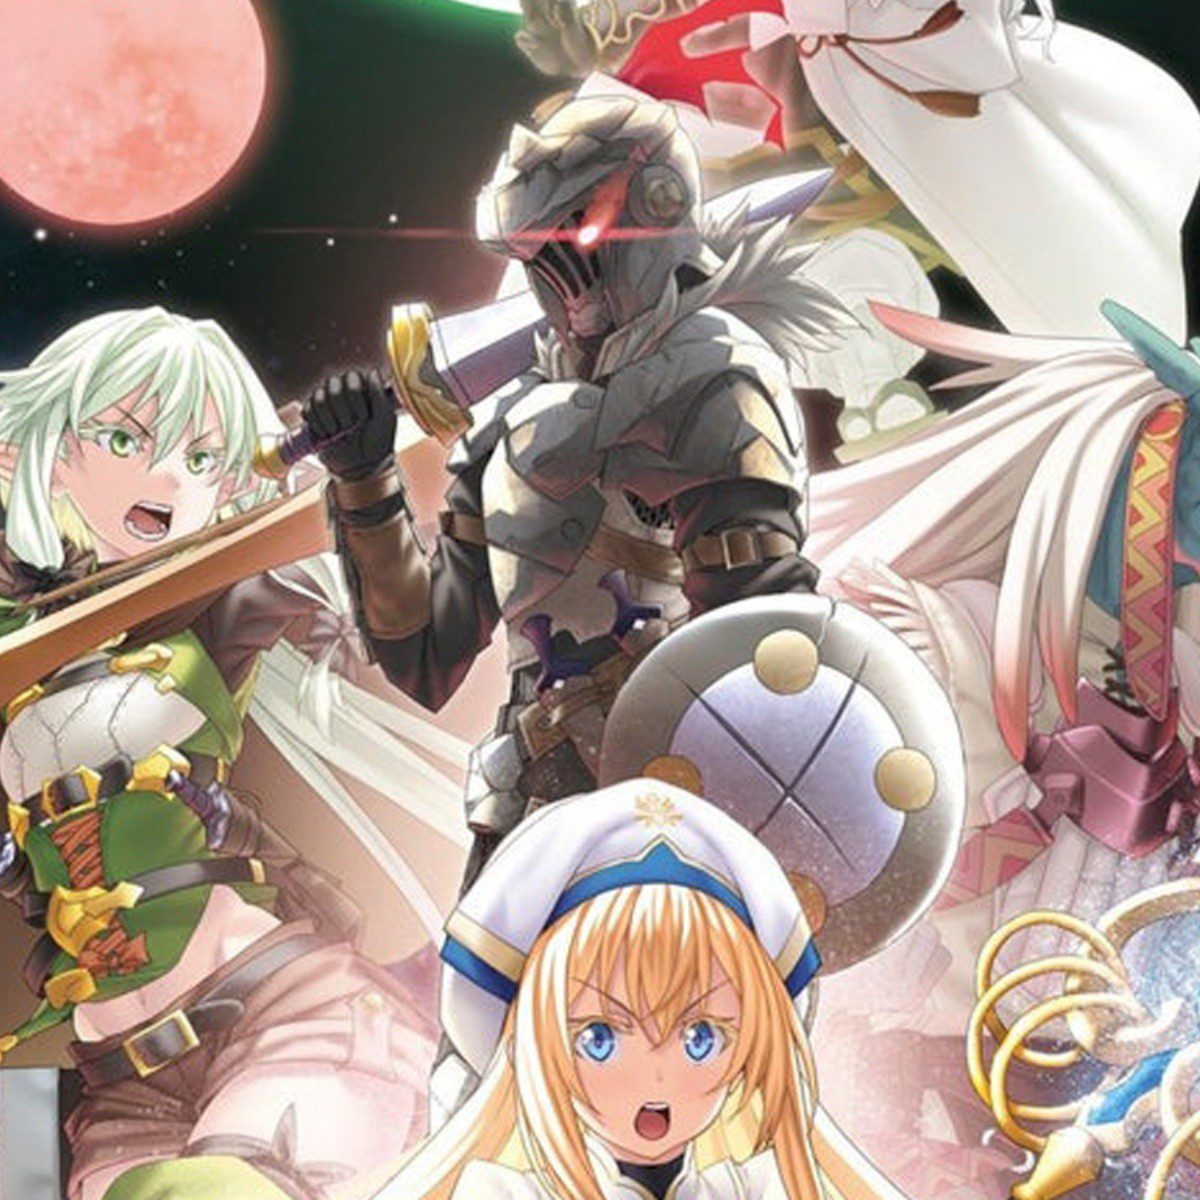 Goblin Slayer 2 announced during the event of GE FES 21